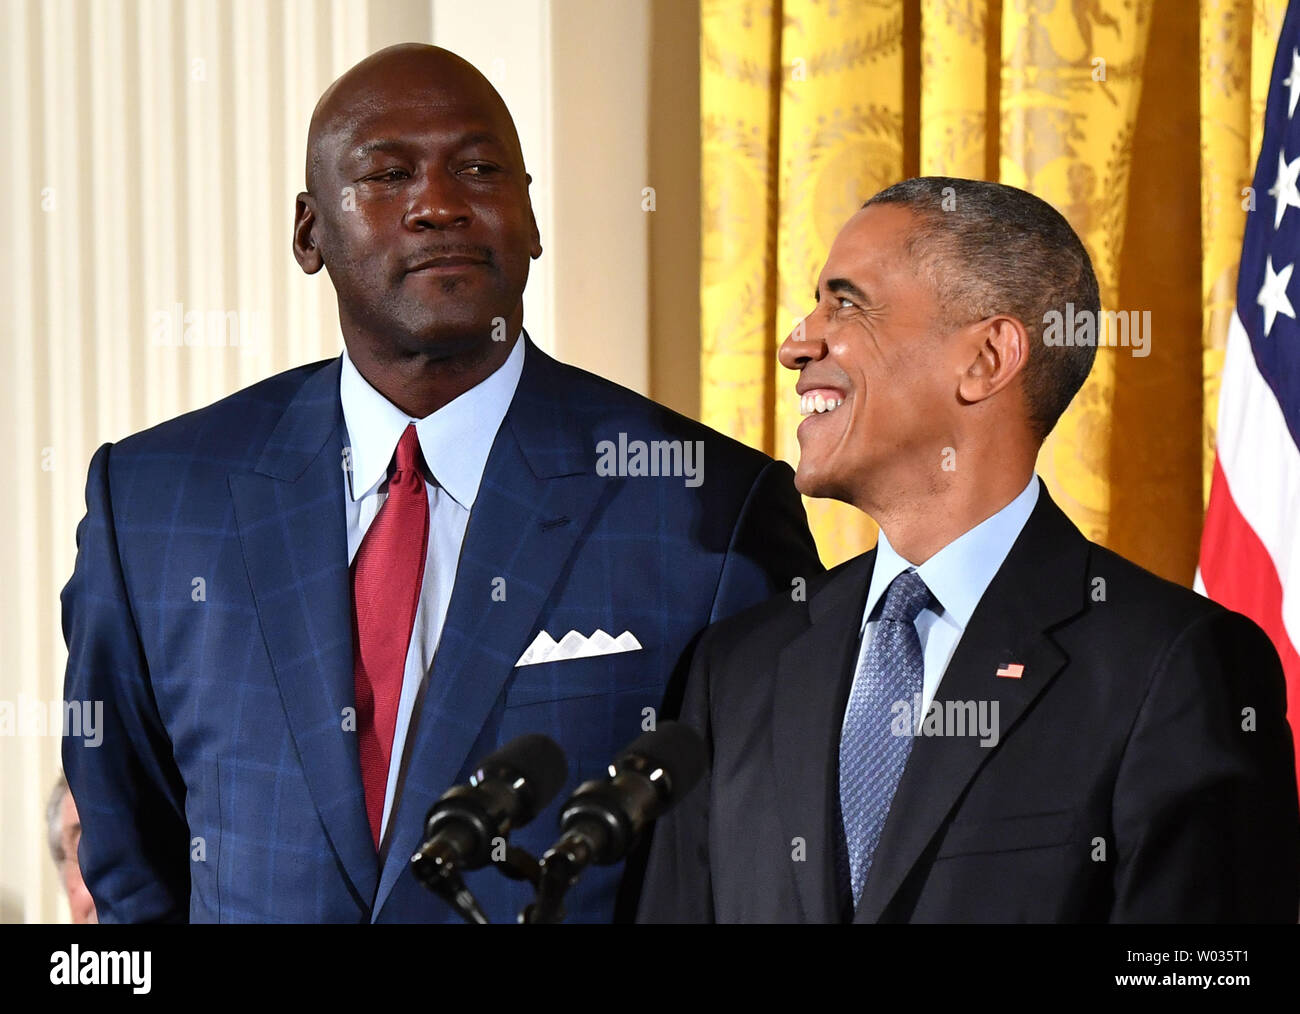 President Barack Obama awards the Presidential Medal of Freedom to  basketball legend Michael Jordan, during a ceremony at the White House in  Washington, DC, on November 22, 2016. Obama awarded 21 medals